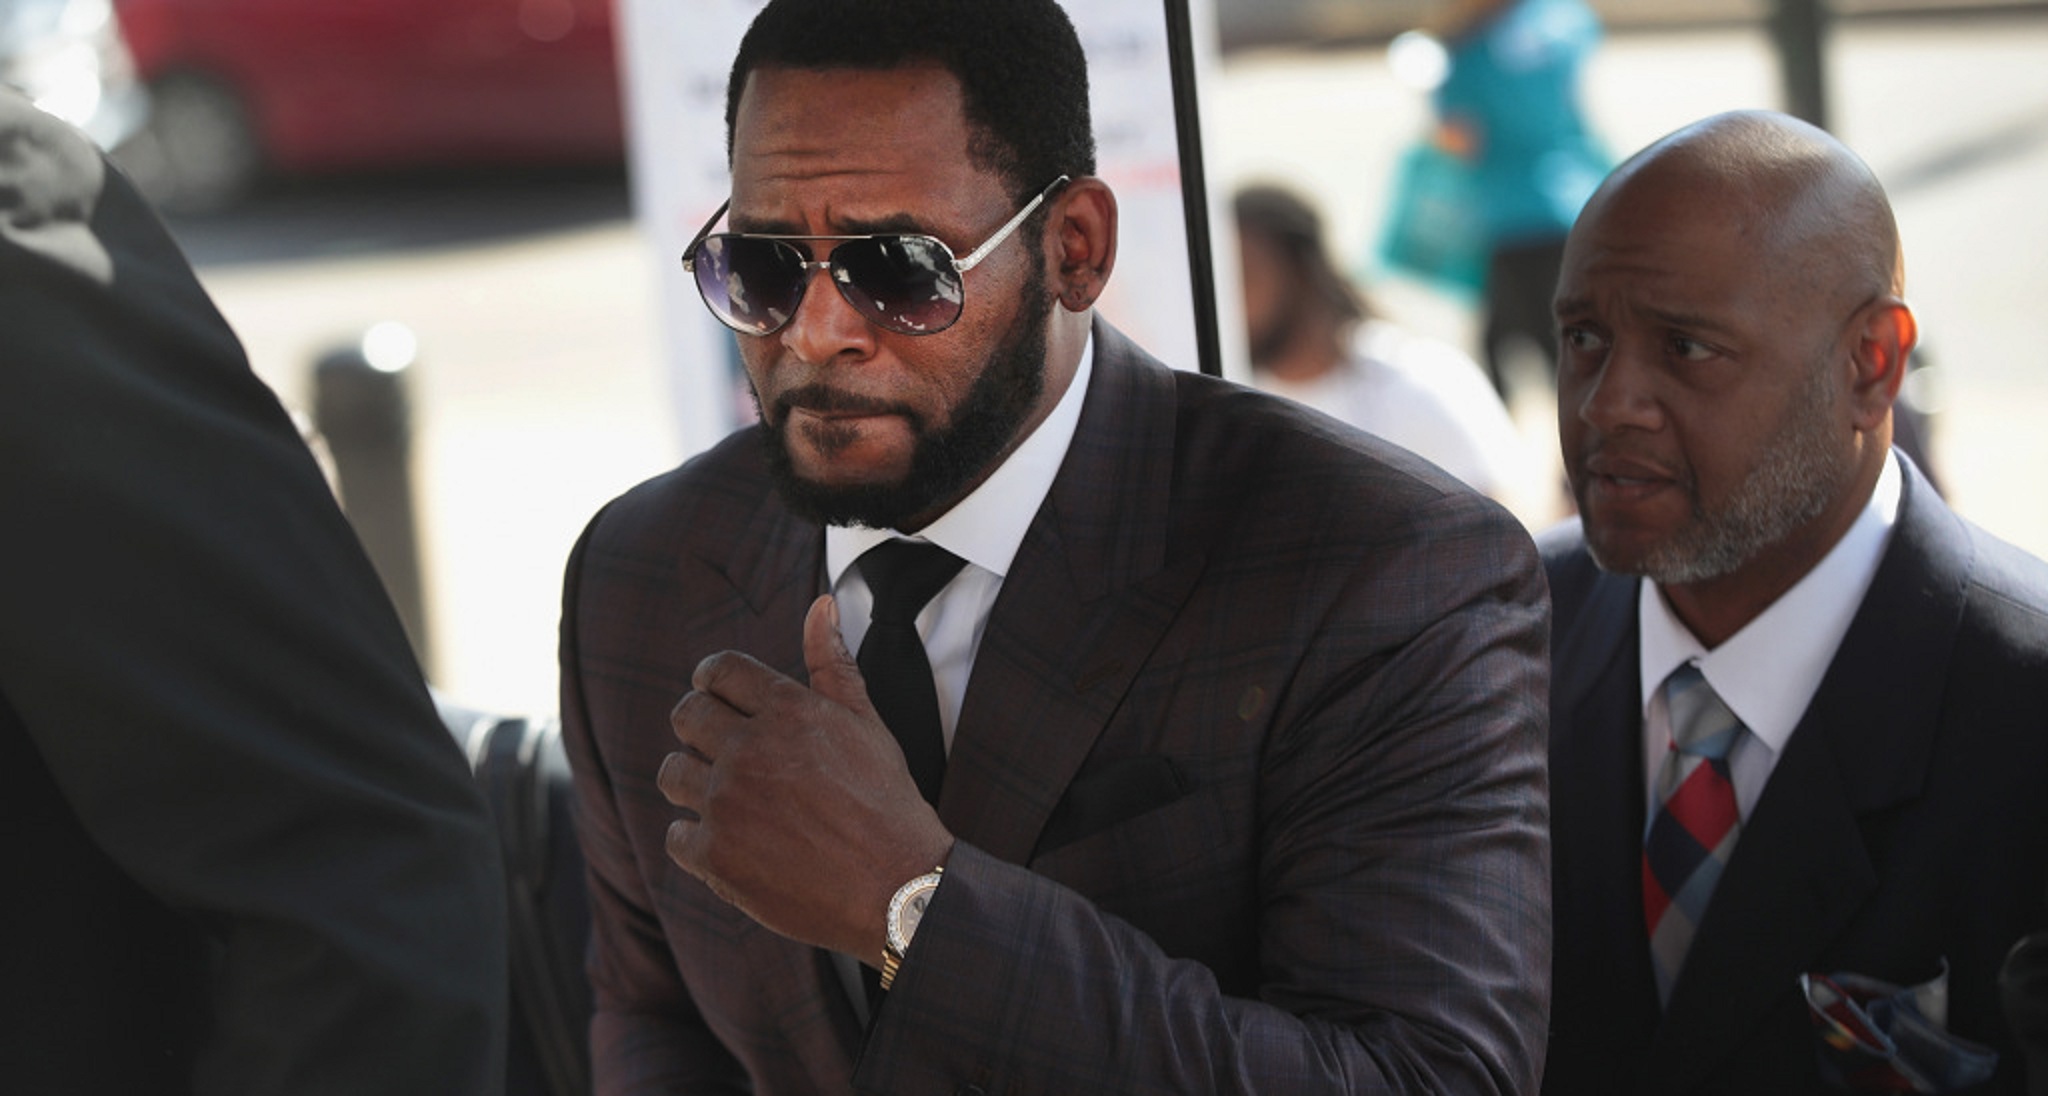 R. Kelly Arrested On Sex Trafficking Charges by NYPD in Chicago